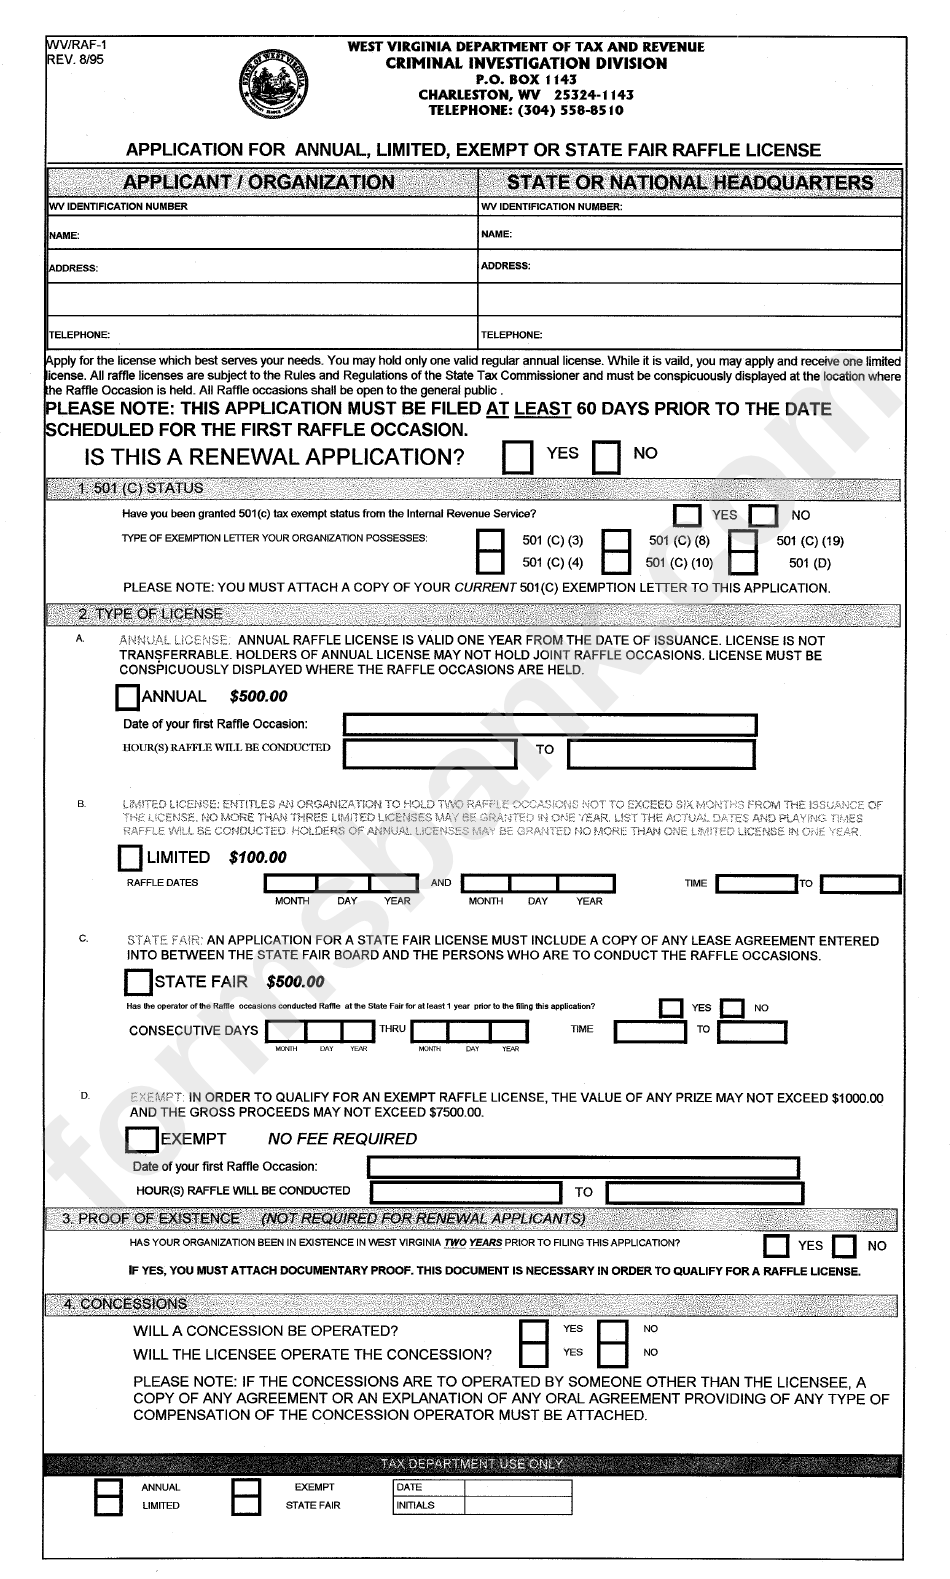 Form Wv/raf-1 - Application For Annual, Limited, Exempt Or State Fair Raffle License 1995